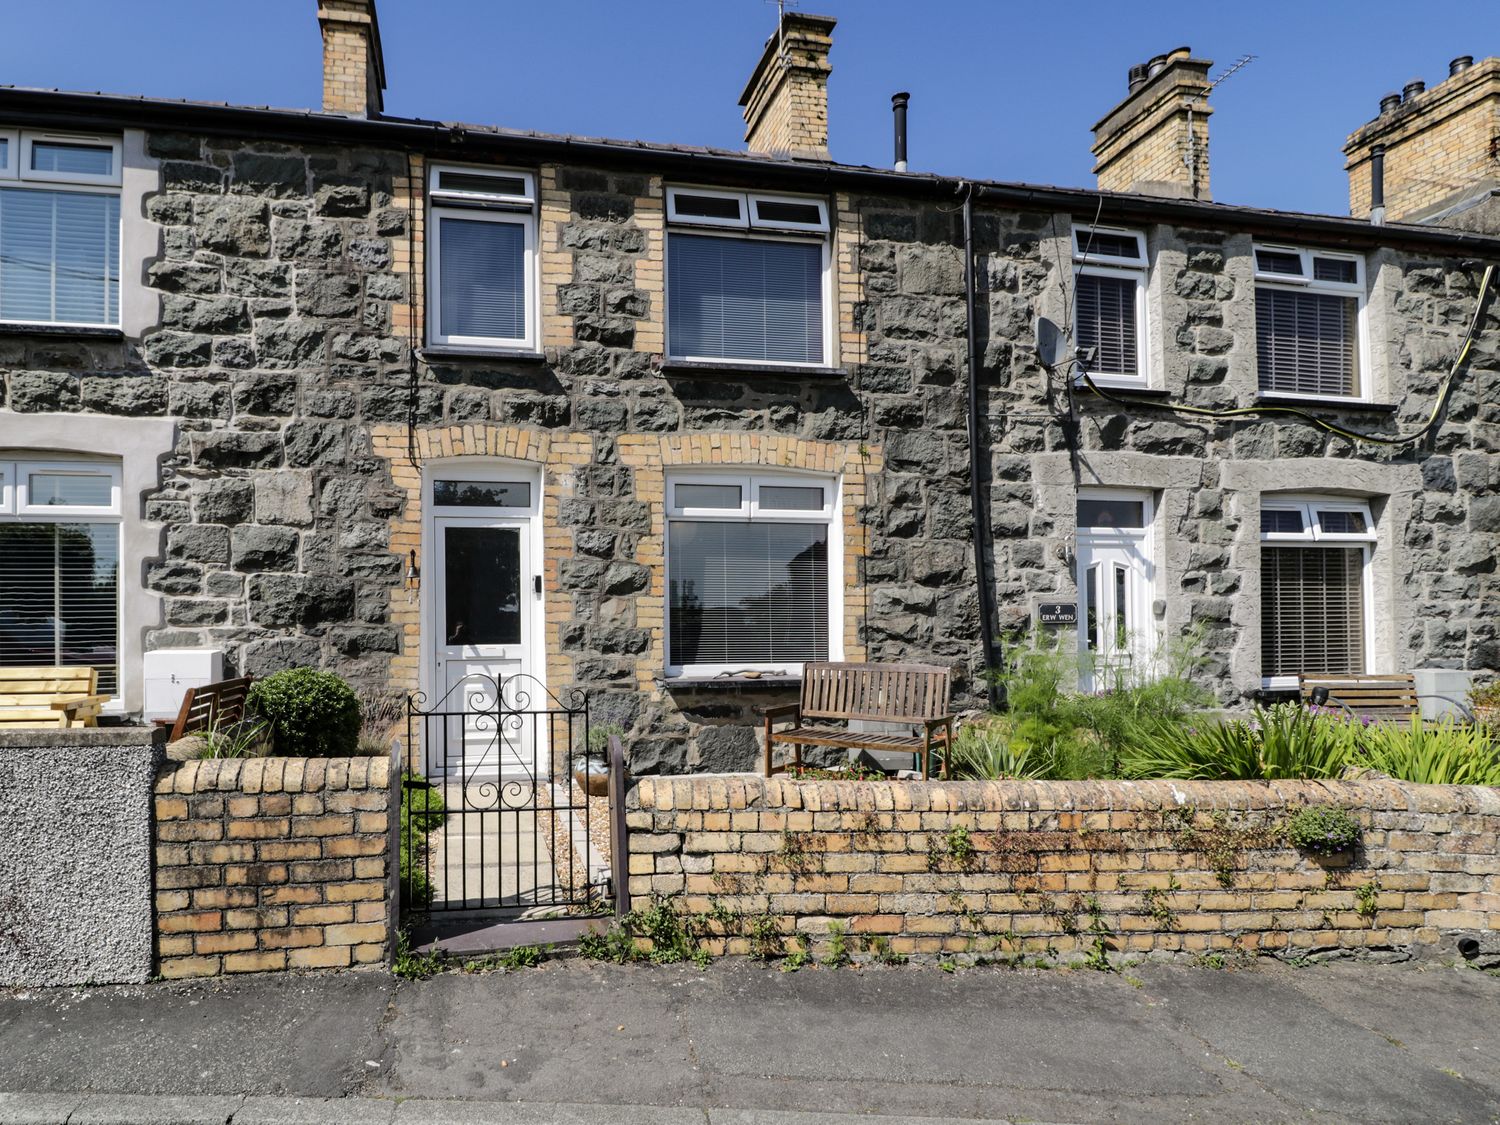 4 Arvonia Terrace - North Wales - 1073336 - photo 1